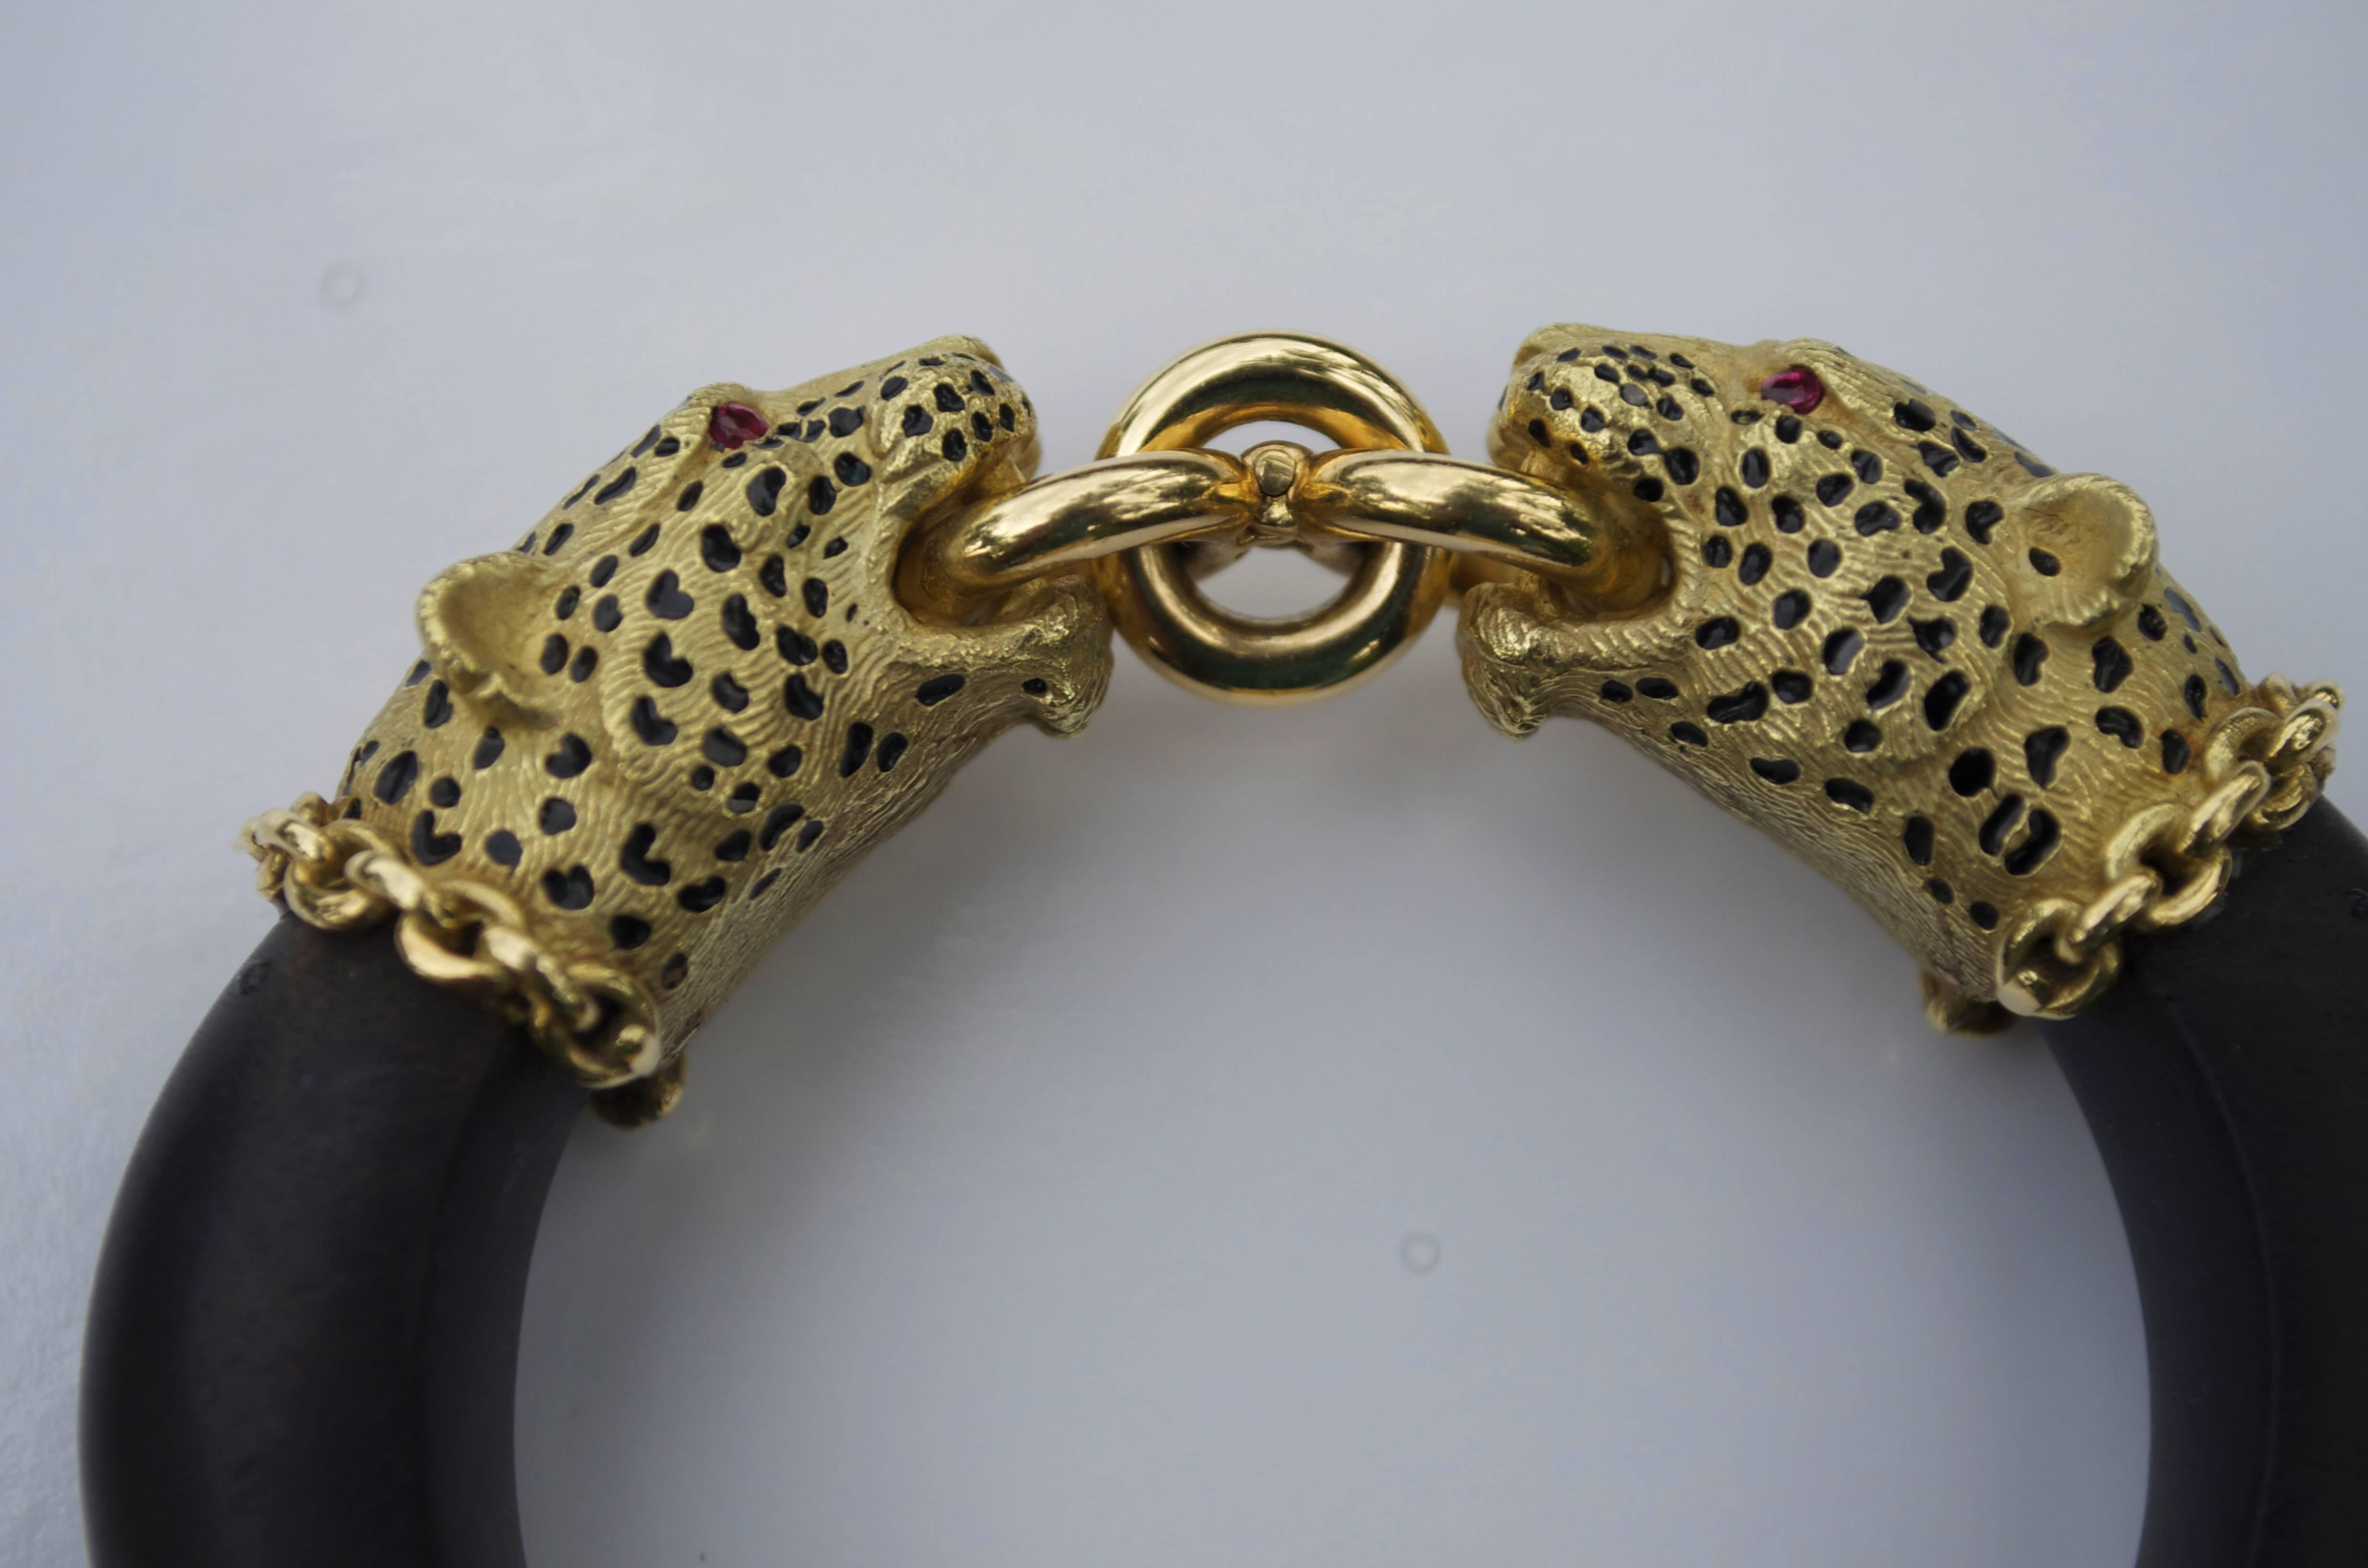 Two opposing leopards adorned with faceted ruby eyes and enameled black spots set atop a satin ebony wooden cuff. These are the outside measurements.The model's wrist is 6 3/4 